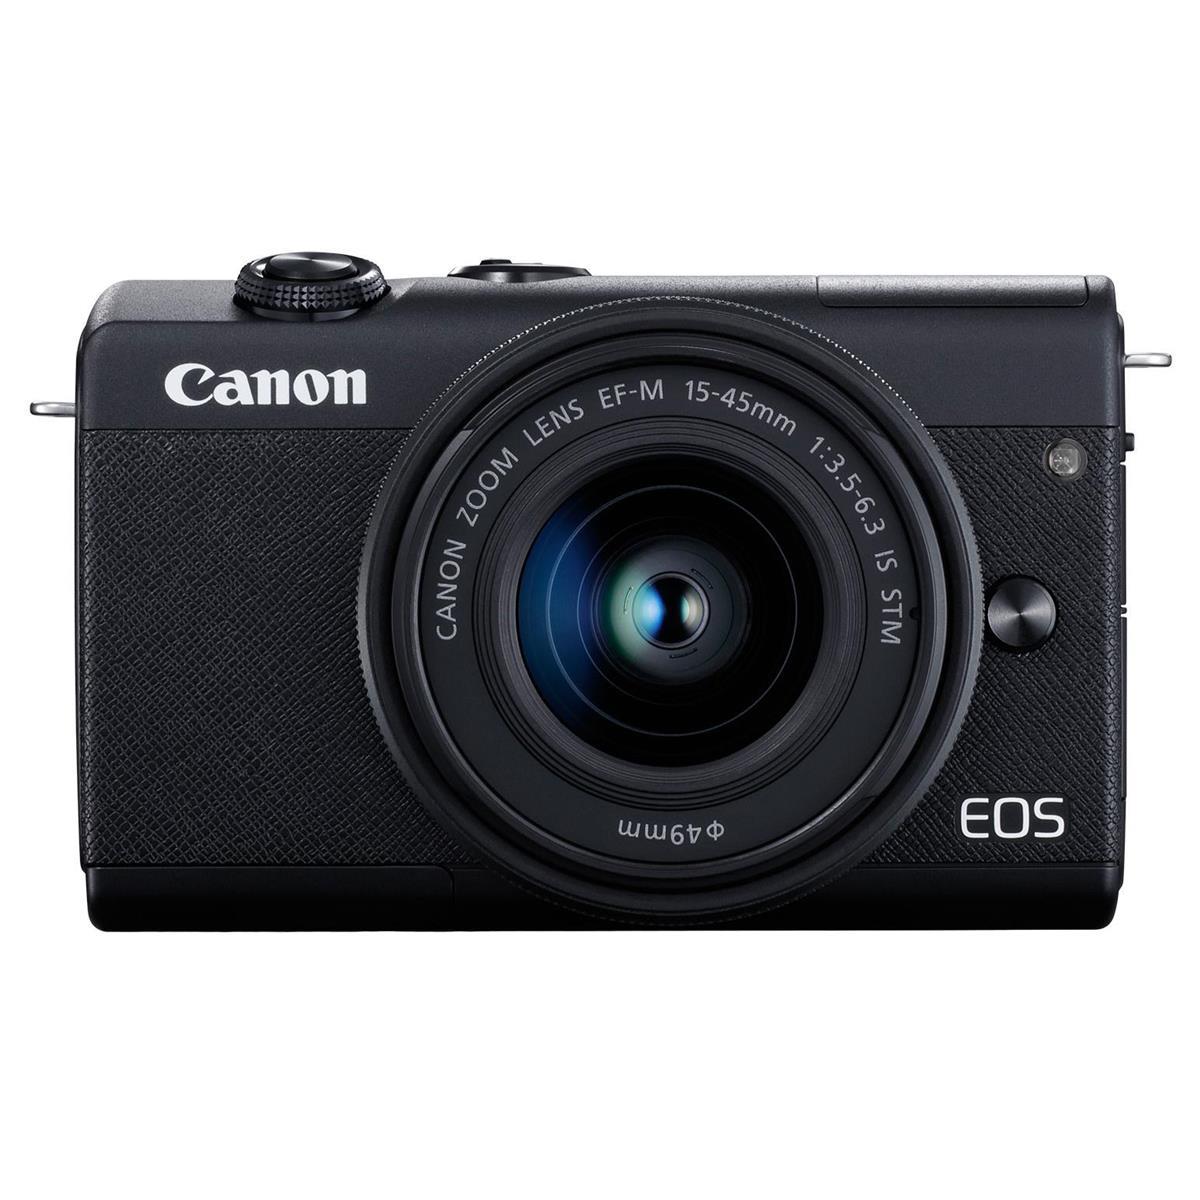 Image of Canon EOS M200 Mirrorless Camera with EF-M 15-45mm f/3.5-6.3 IS STM Lens